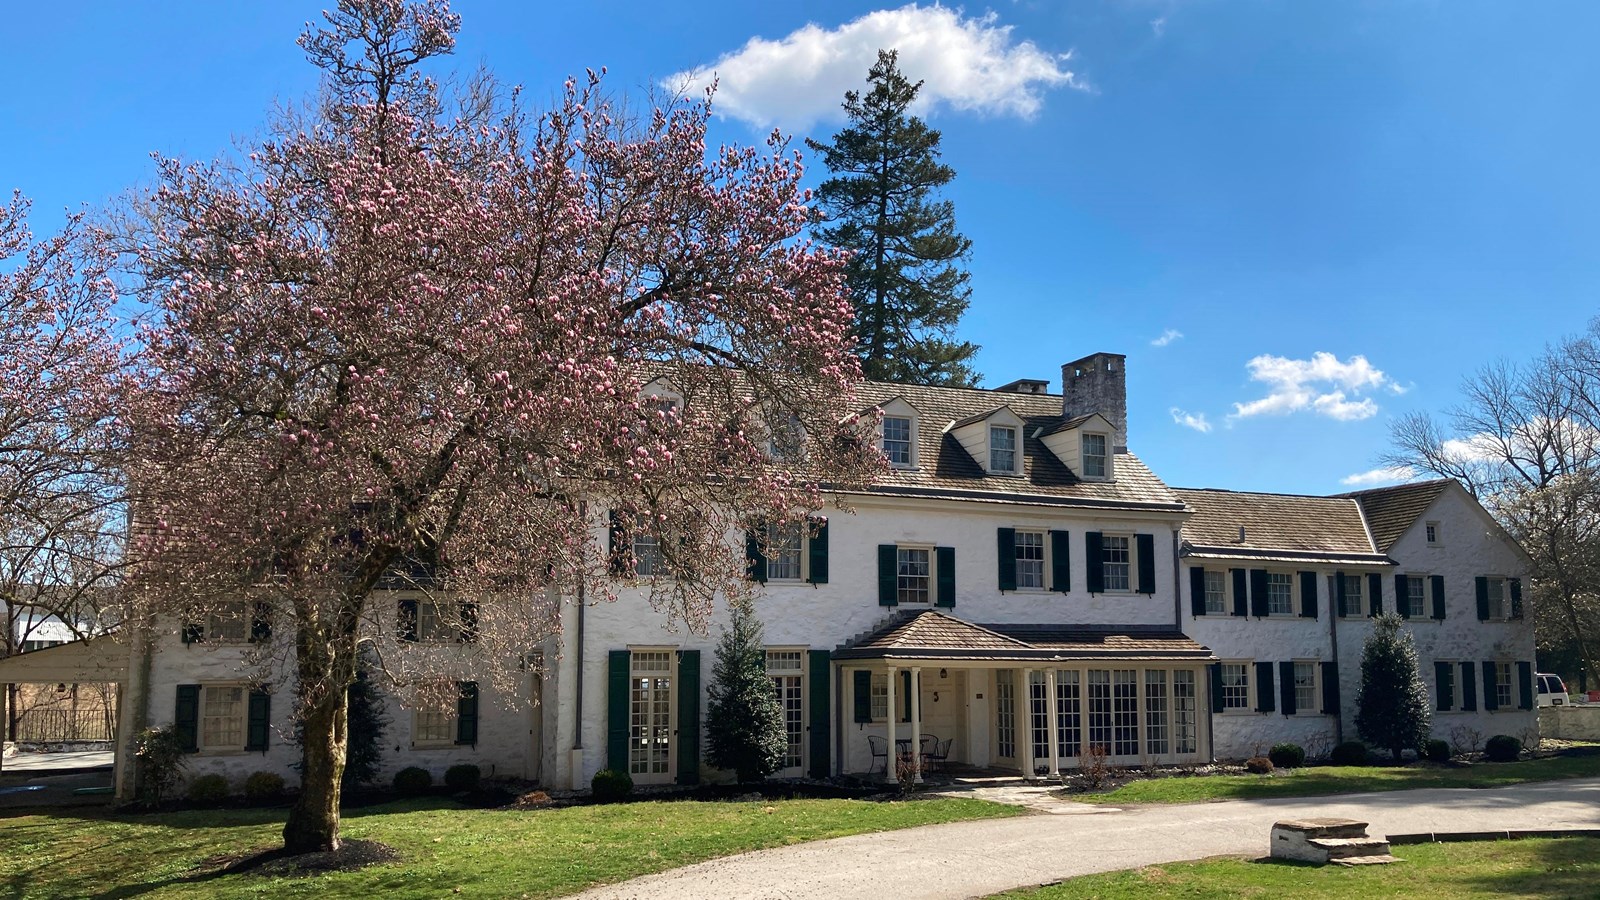 a large colonial revival style house with a flowering tree in front.